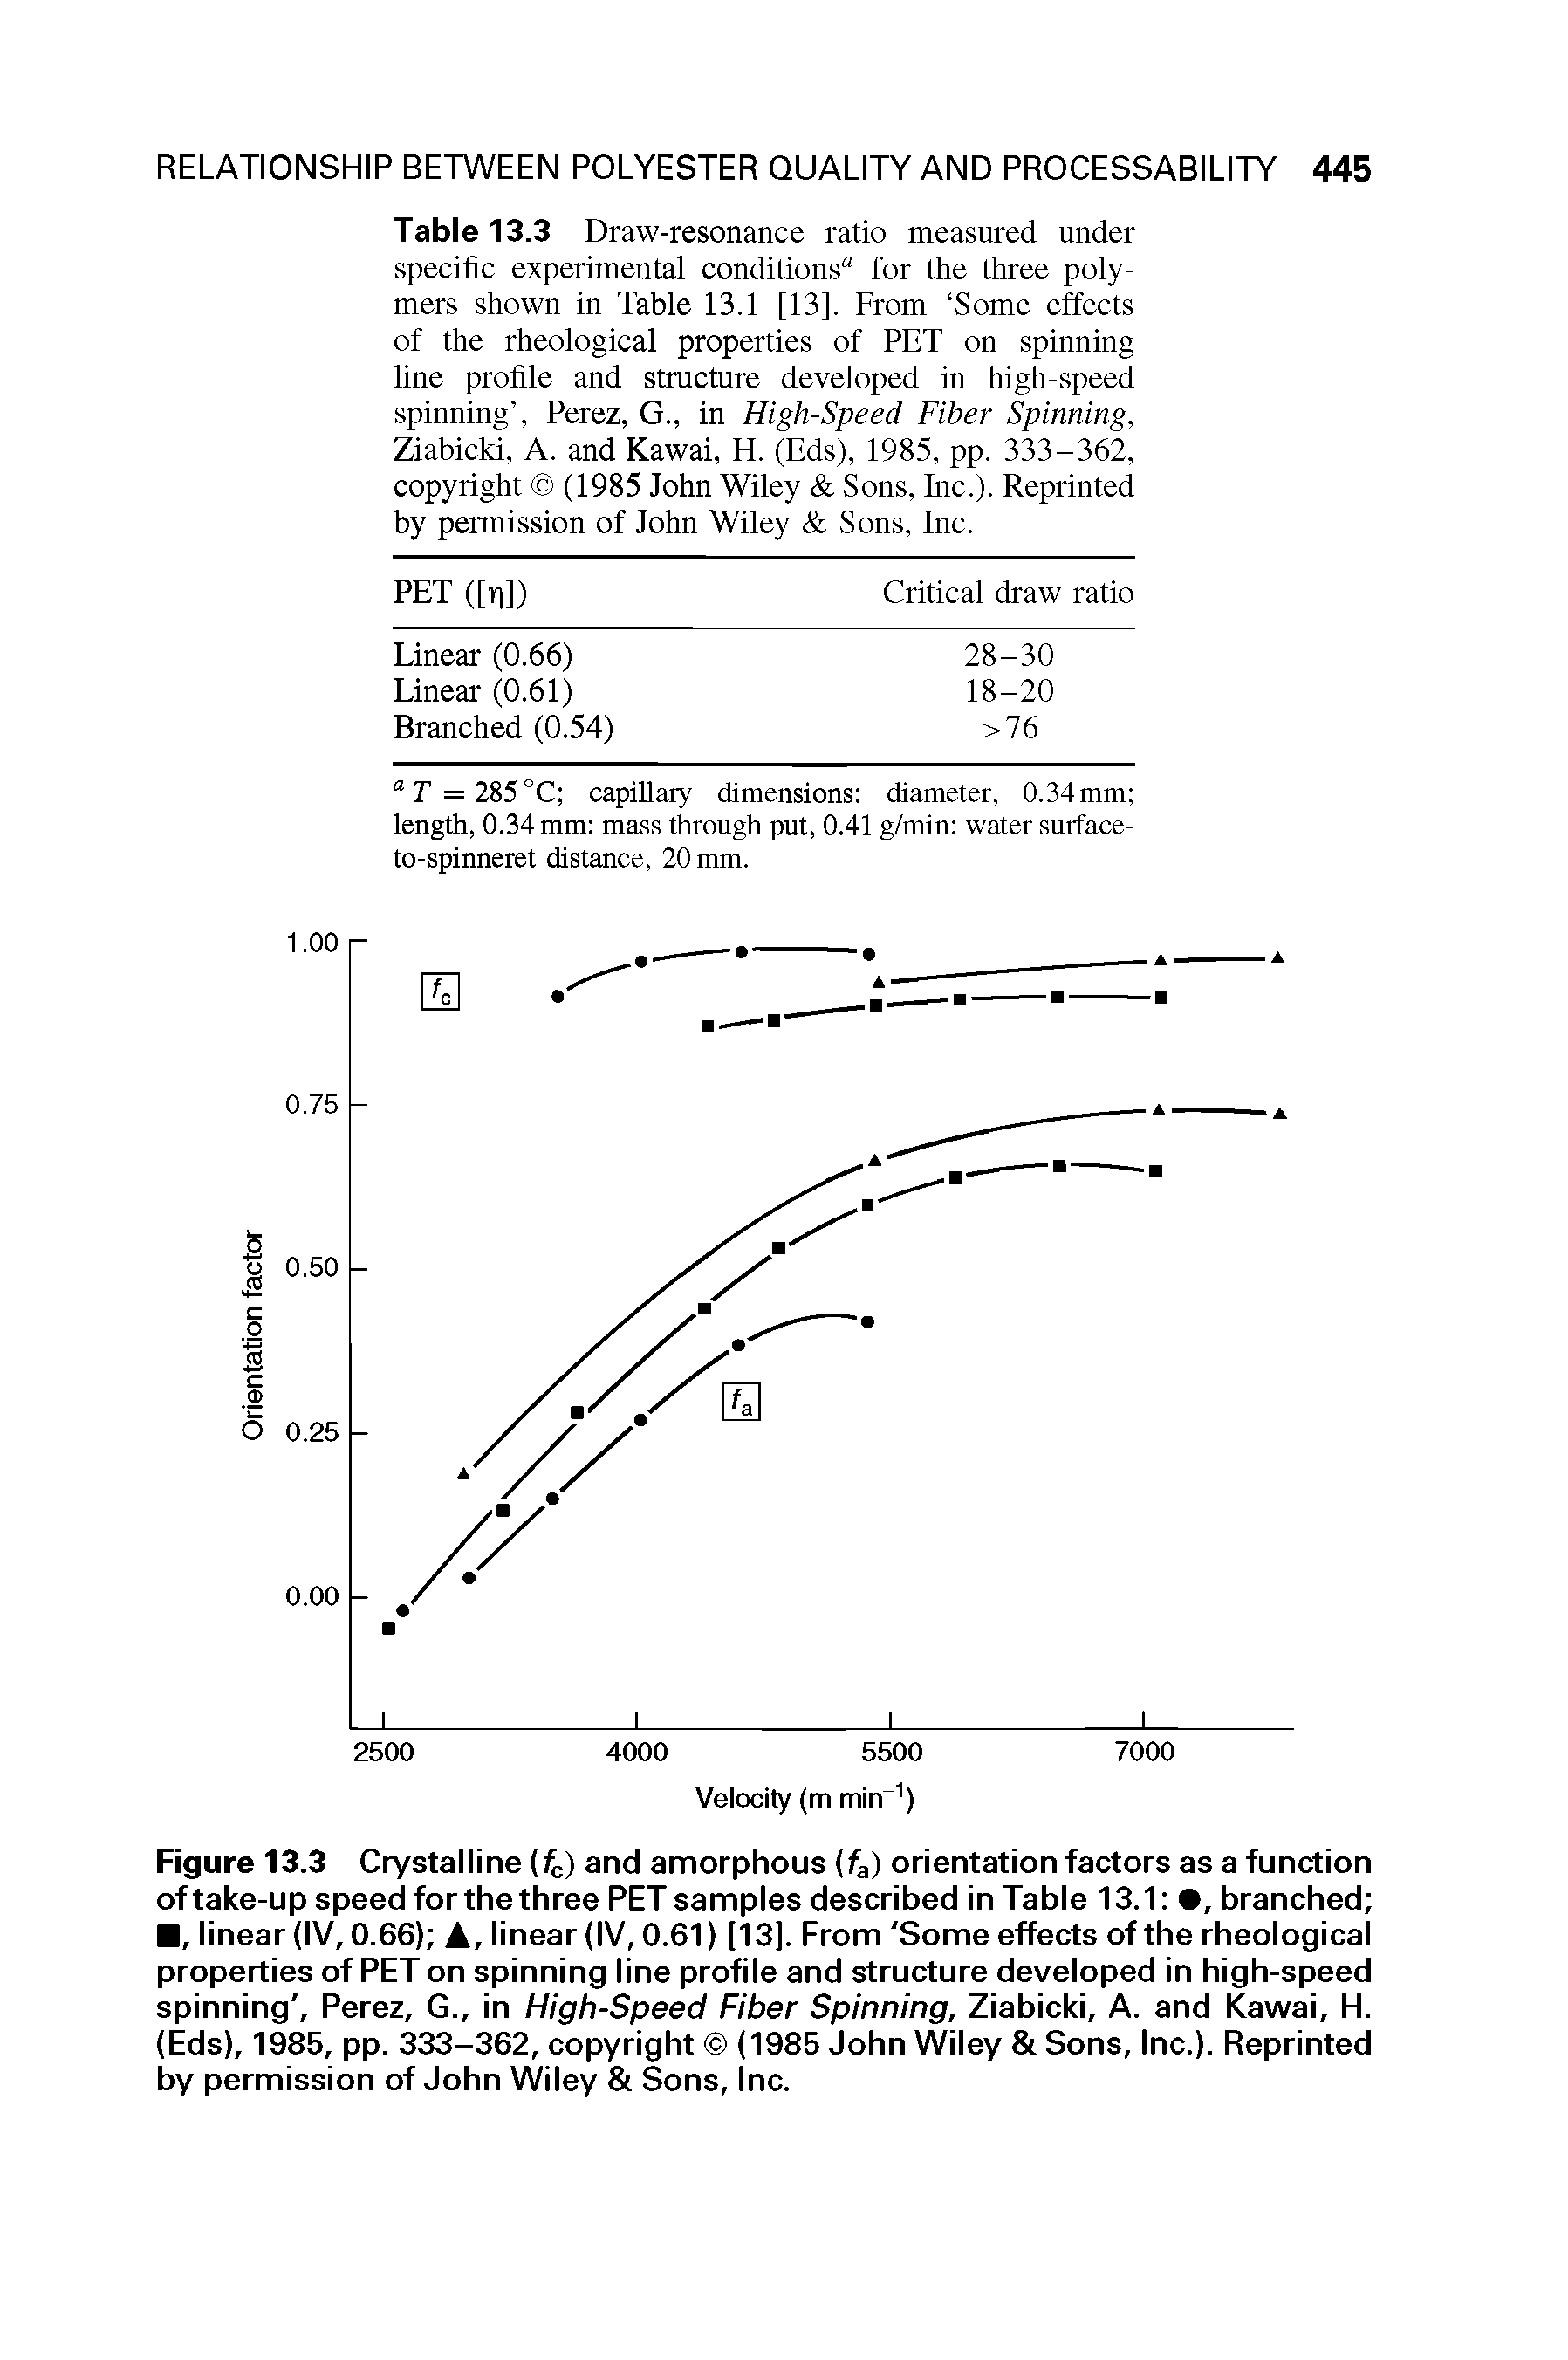 Figure 13.3 Crystalline (fc) and amorphous (fa) orientation factors as a function of take-up speed for the three PET samples described in Table 13.1 , branched , linear (IV, 0.66) A, linear (IV, 0.61) [13]. From Some effects of the rheological properties of PET on spinning line profile and structure developed in high-speed spinning, Perez, G., in High-Speed Fiber Spinning, Ziabicki, A. and Kawai, H. (Eds), 1985, pp. 333-362, copyright (1985 John Wiley Sons, Inc.). Reprinted by permission of John Wiley Sons, Inc.